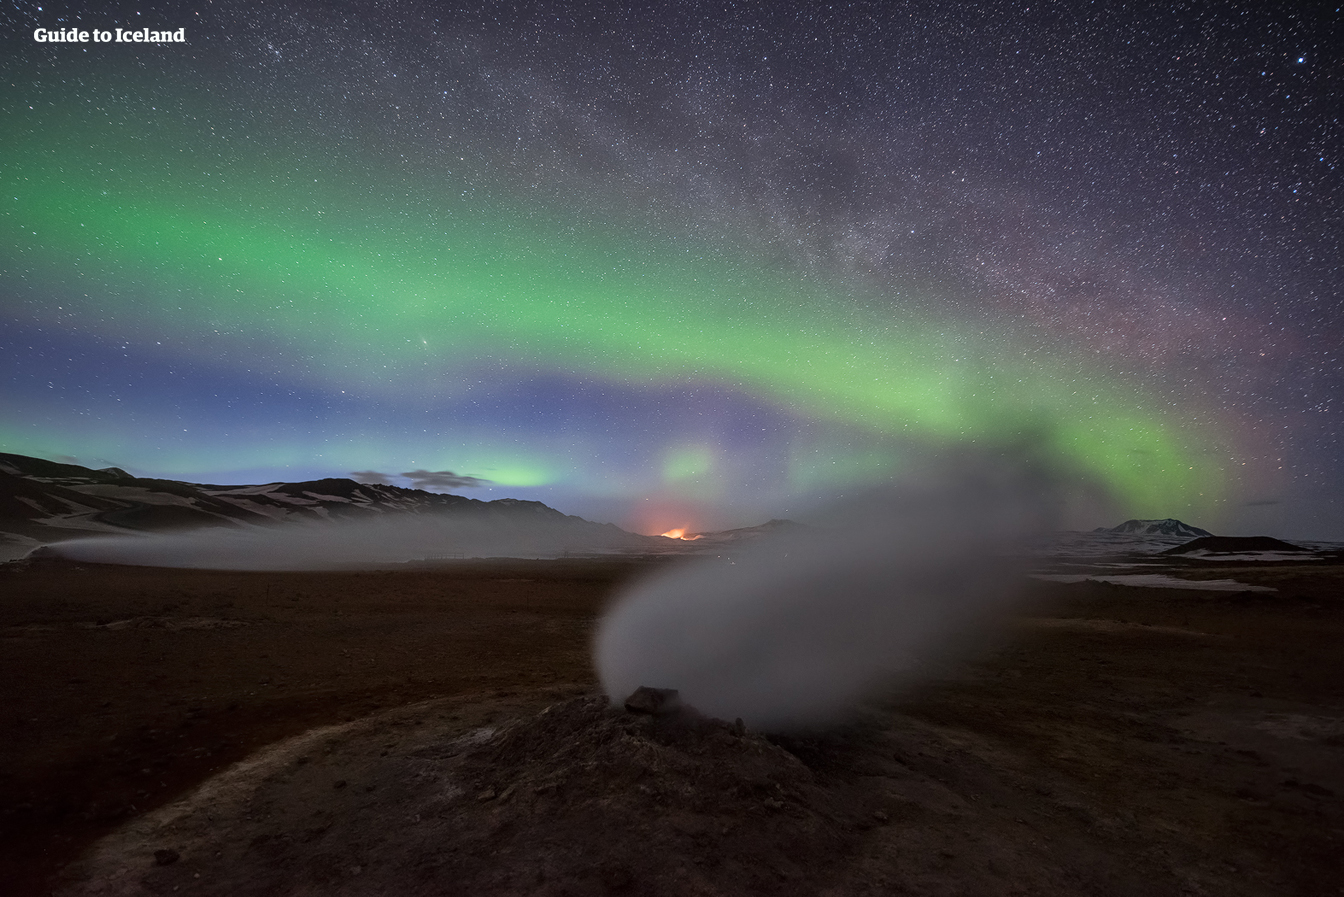 Night-time in Iceland's winter presents plenty of opportunities for Northern Lights hunting.